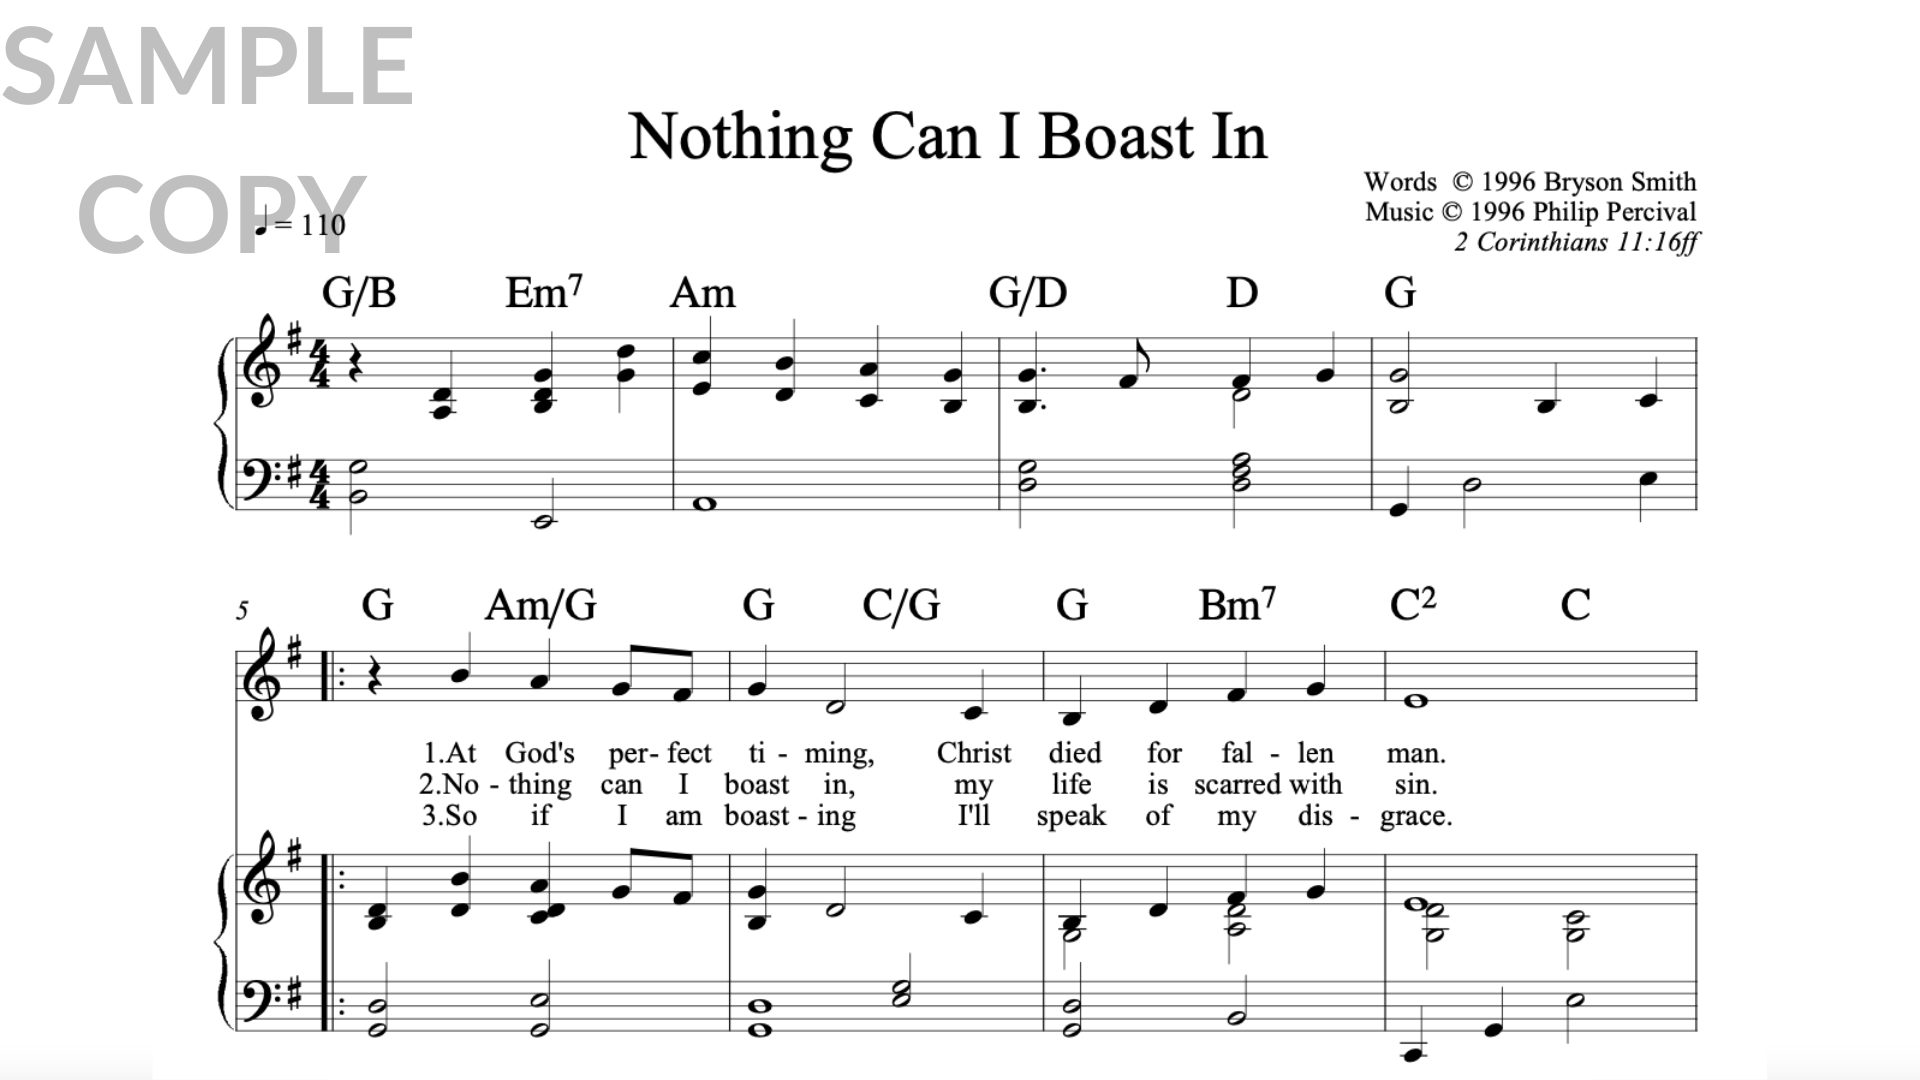 Nothing Can I Boast In (2005)